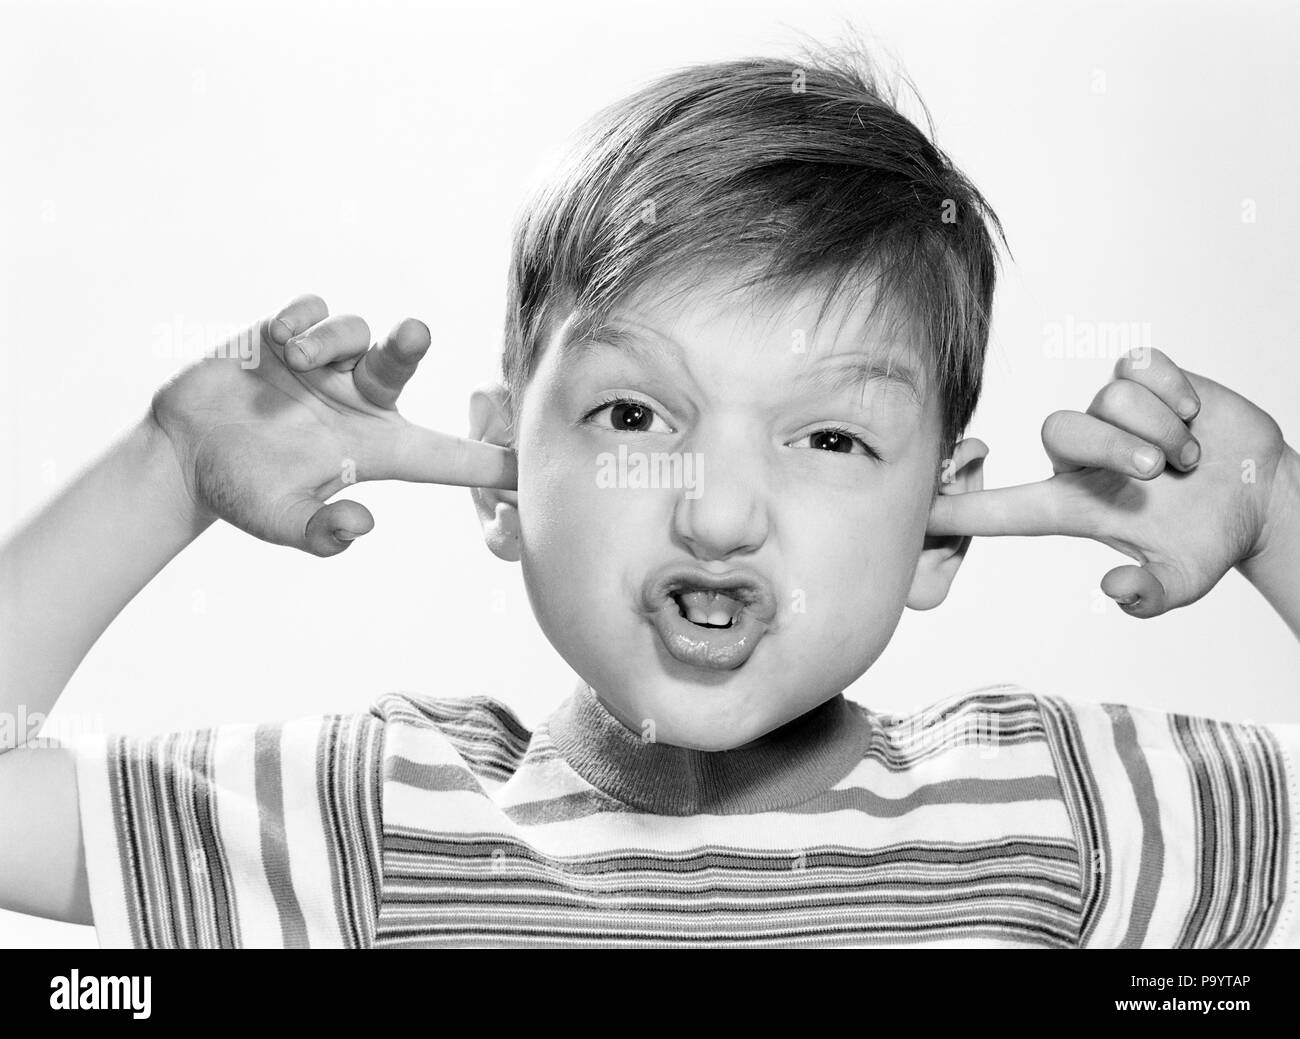 1960s SURPRISED ALARMED DISTRESSED BOY WEARING STRIPED T-SHIRT LOOKING AT CAMERA STICKING INDEX FINGERS IN HIS EARS - j11763 DEB001 HARS RISK EXPRESSIONS B&W EYE CONTACT INDEX COMPLAINING WEIRD HEAD AND SHOULDERS DISCOVERY DISTRESSED EXCITEMENT LOUD ZANY STICKING UNCONVENTIONAL IN BOTHERED UNCOMFORTABLE DEB001 IDIOSYNCRATIC T-SHIRT AMUSING ECCENTRIC JUVENILES PEACE AND QUIET ALARMED BLACK AND WHITE CAUCASIAN ETHNICITY ERRATIC OLD FASHIONED Stock Photo